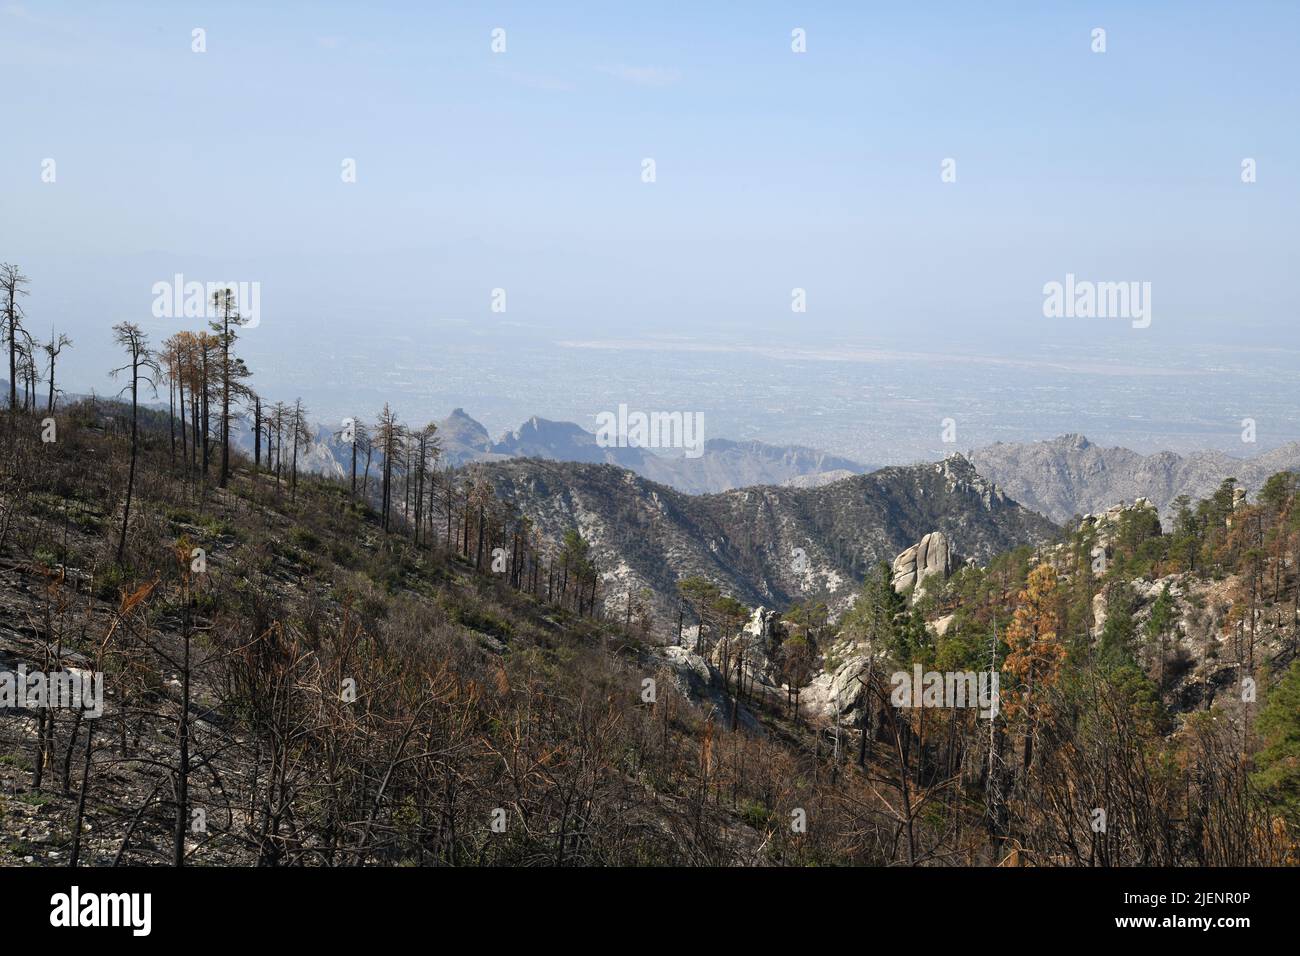 Poor quality air hovers over the Tucson Valley as seen from a burned out area on Mount Lemmon, Sonoran Desert, Santa Catalina Mountains, Coronado Nati Stock Photo